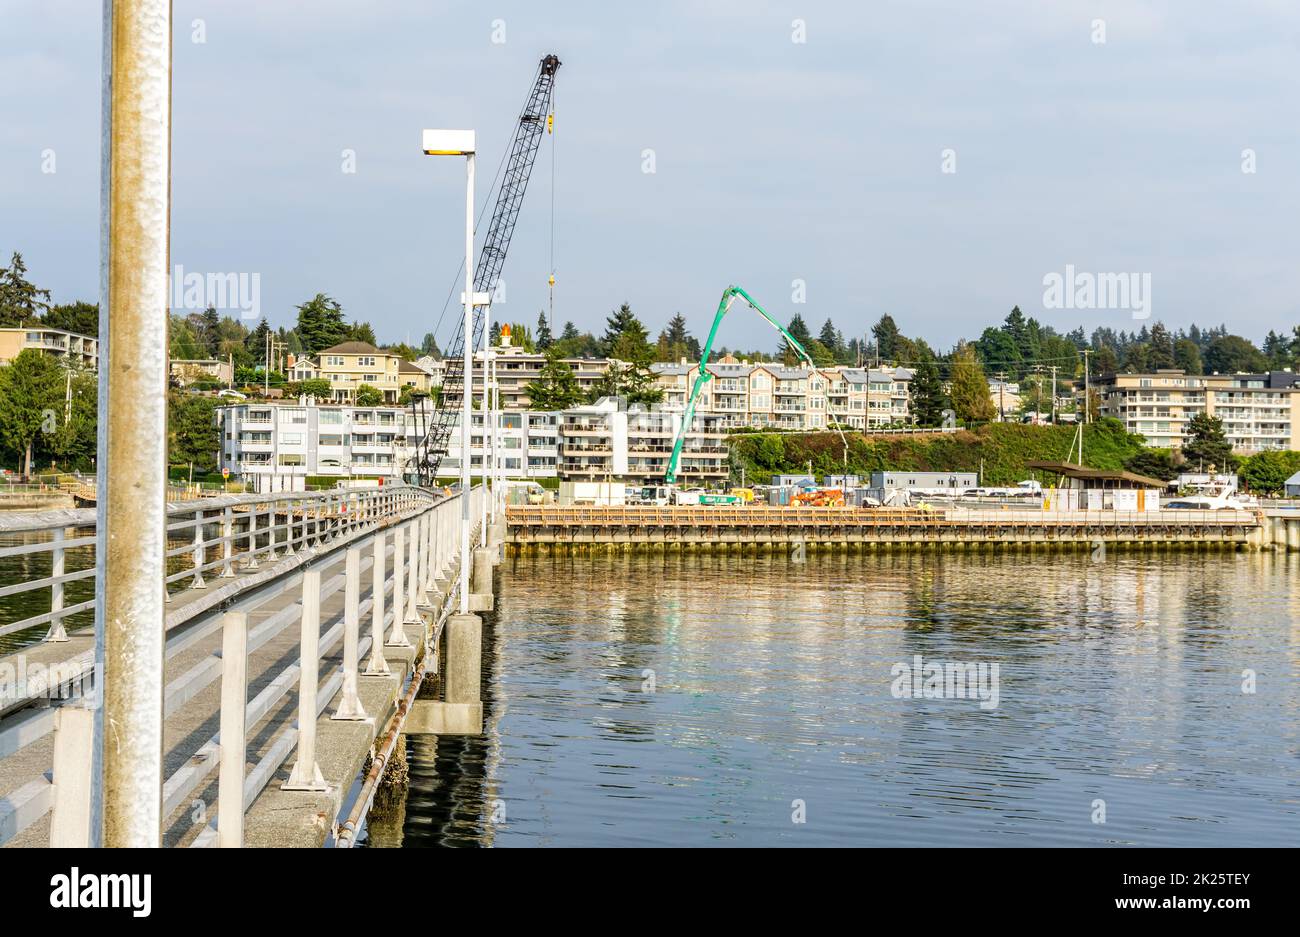 A crane at the Des Moines marina in Washington State shows that construction is happening. Stock Photo